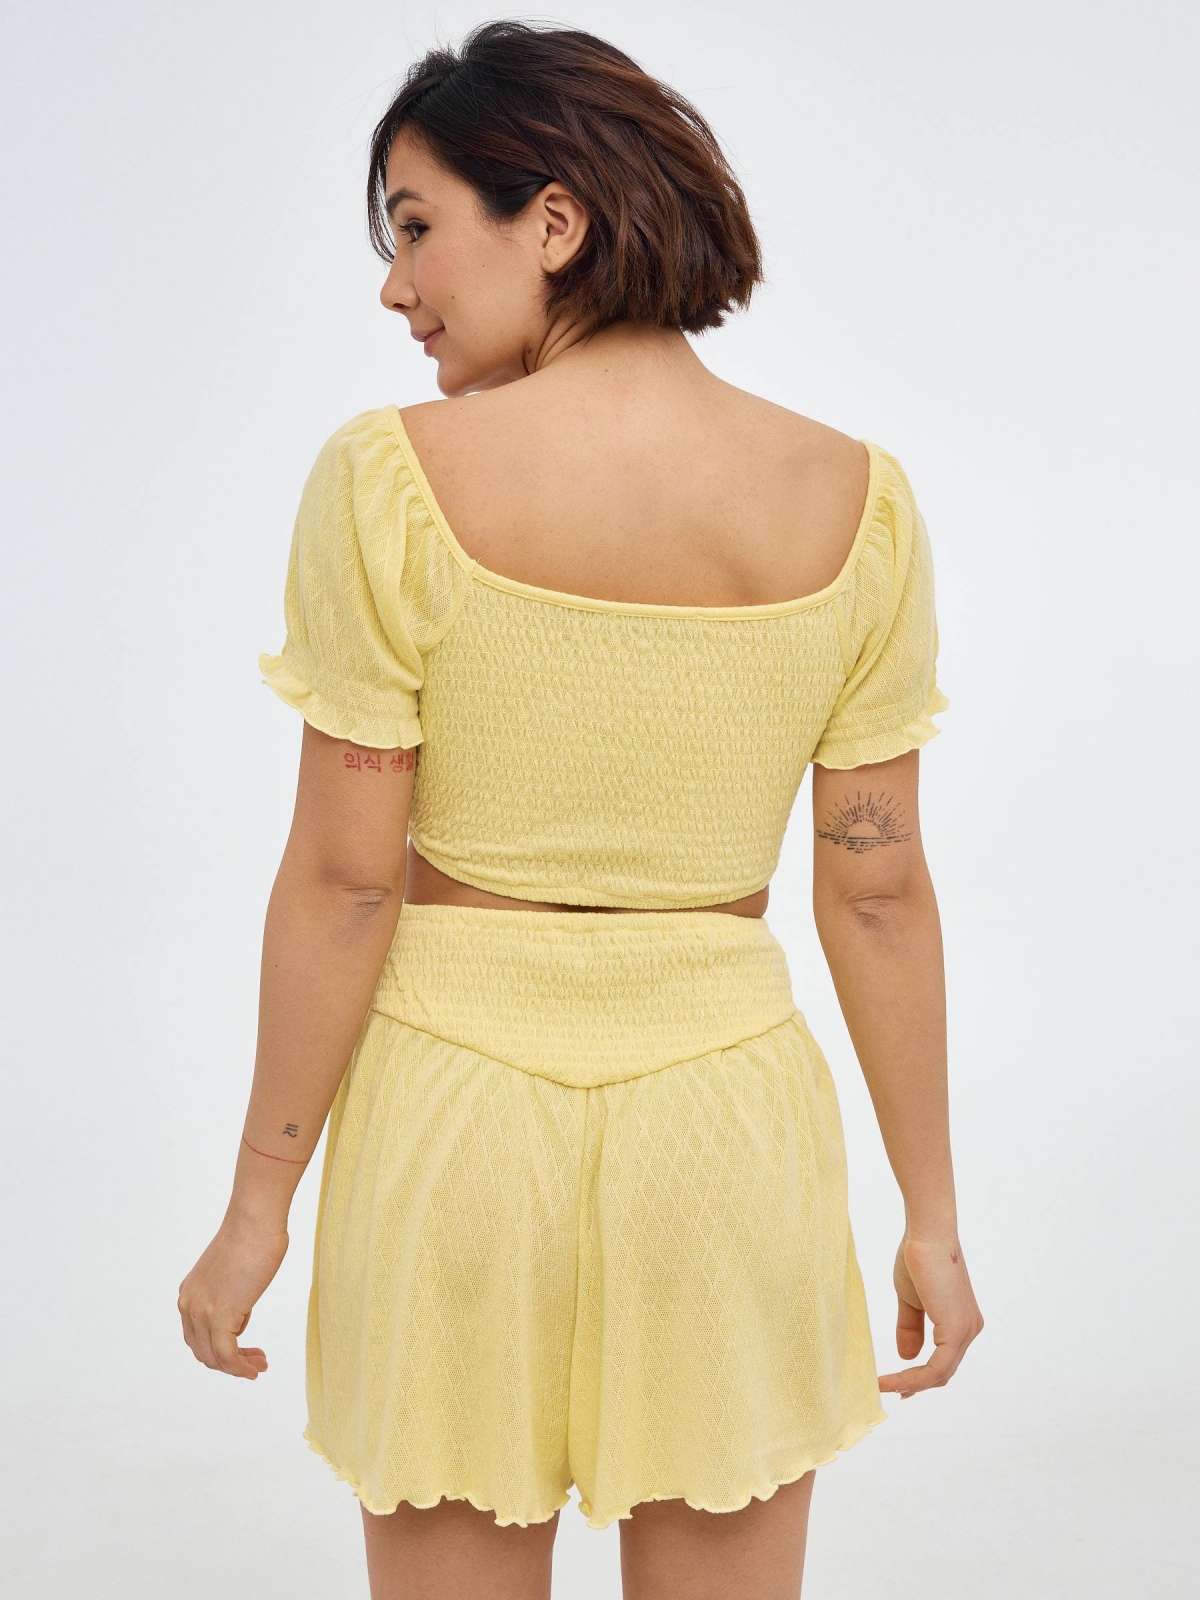 Jacquard shorts pastel yellow middle back view